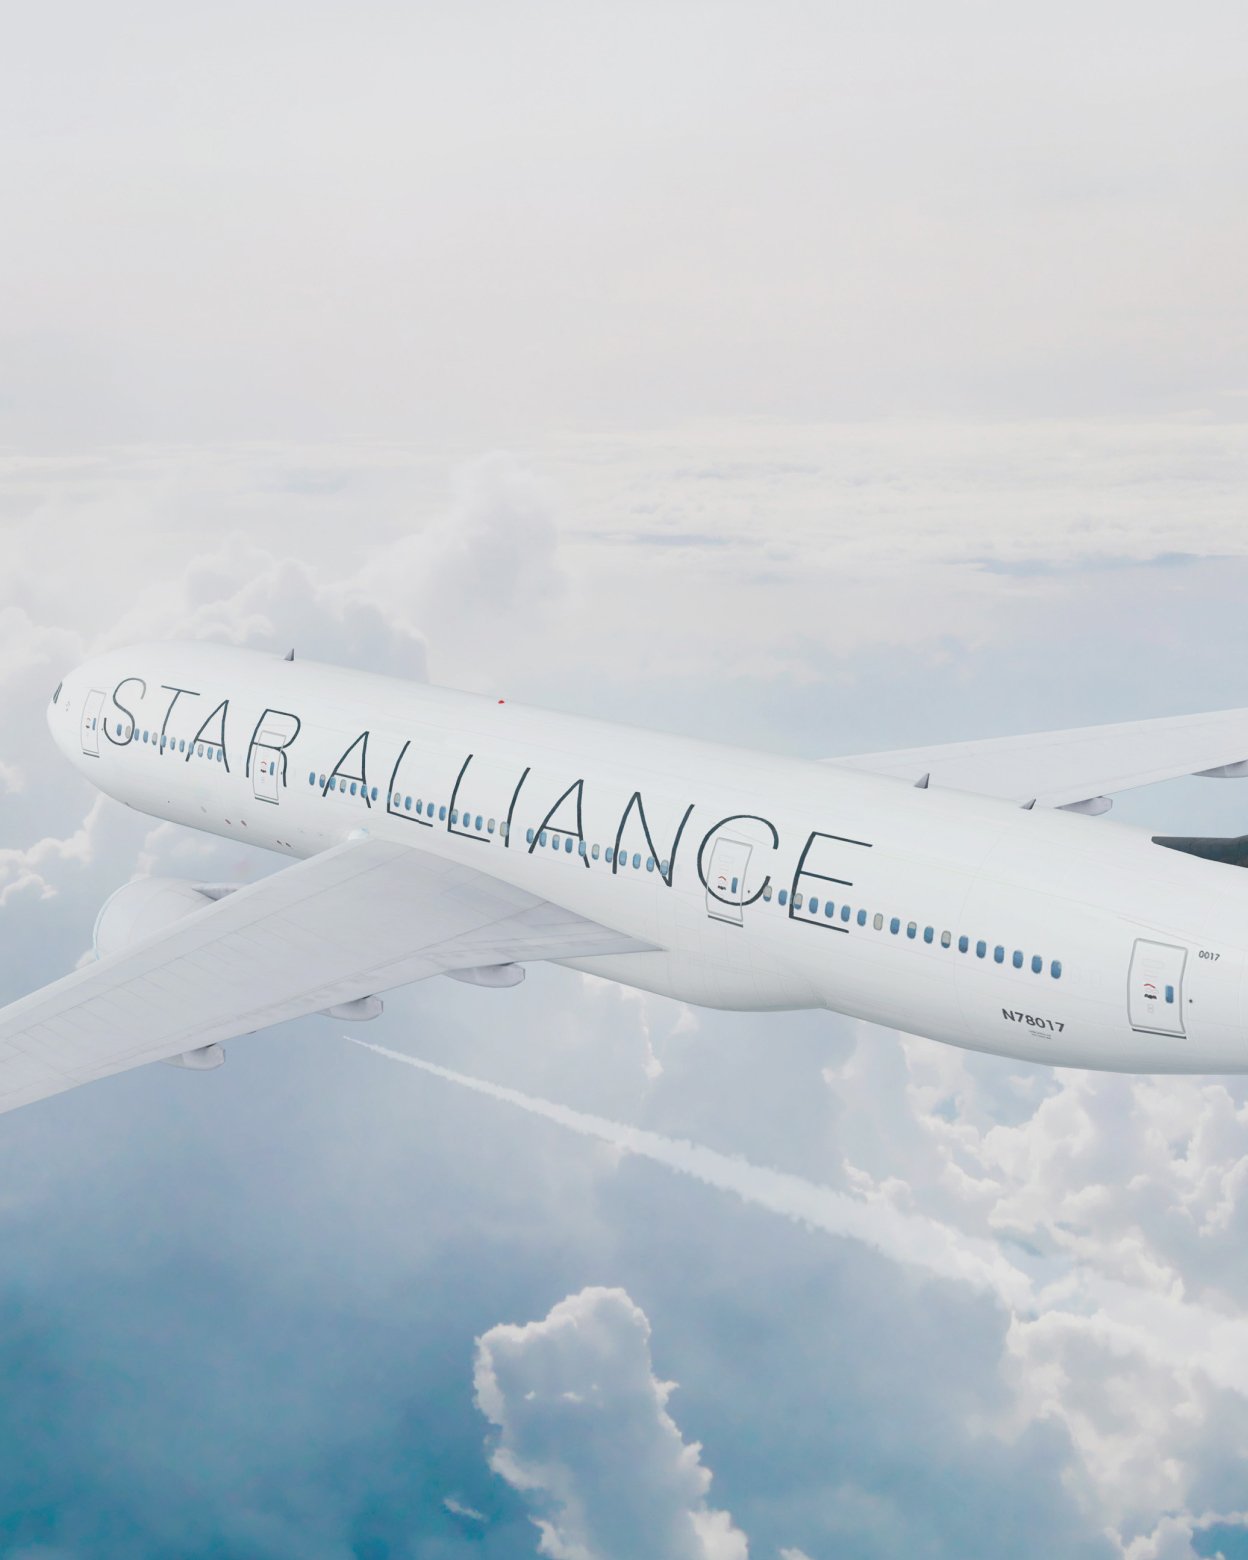 Star Alliance partnered with Nagarro to build a robust iOS and Android 